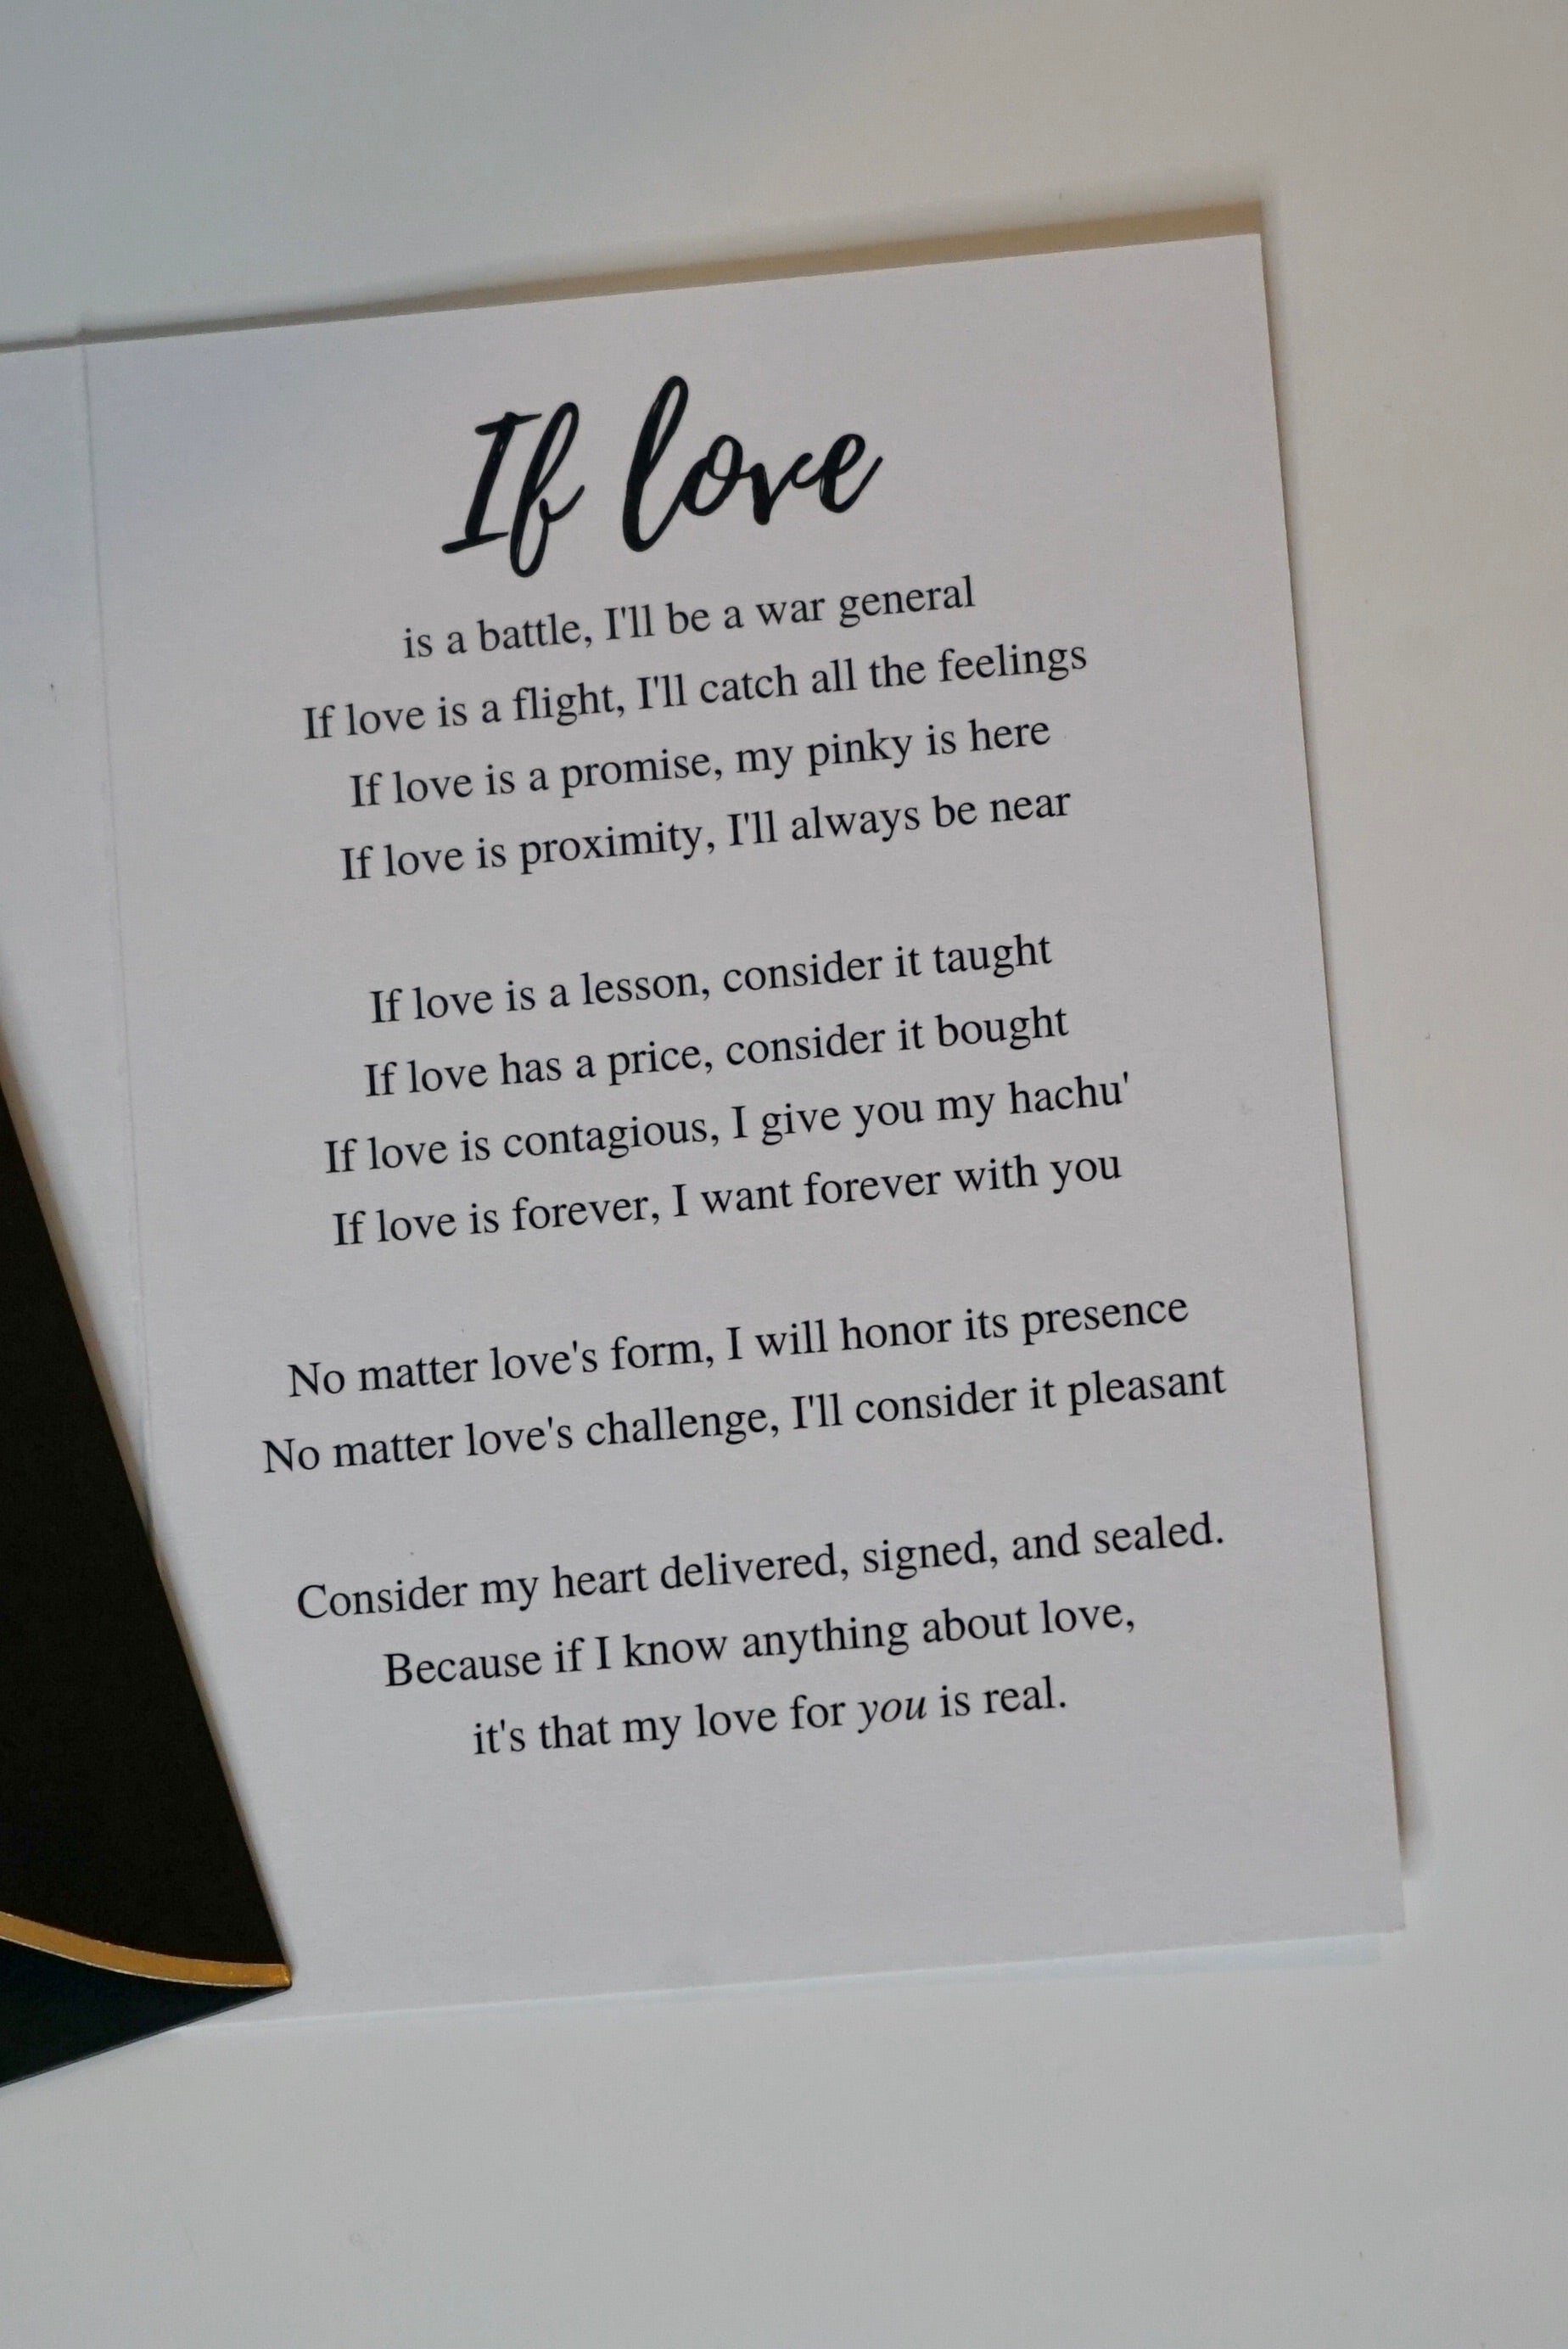 photograph of card with poem "If Love"